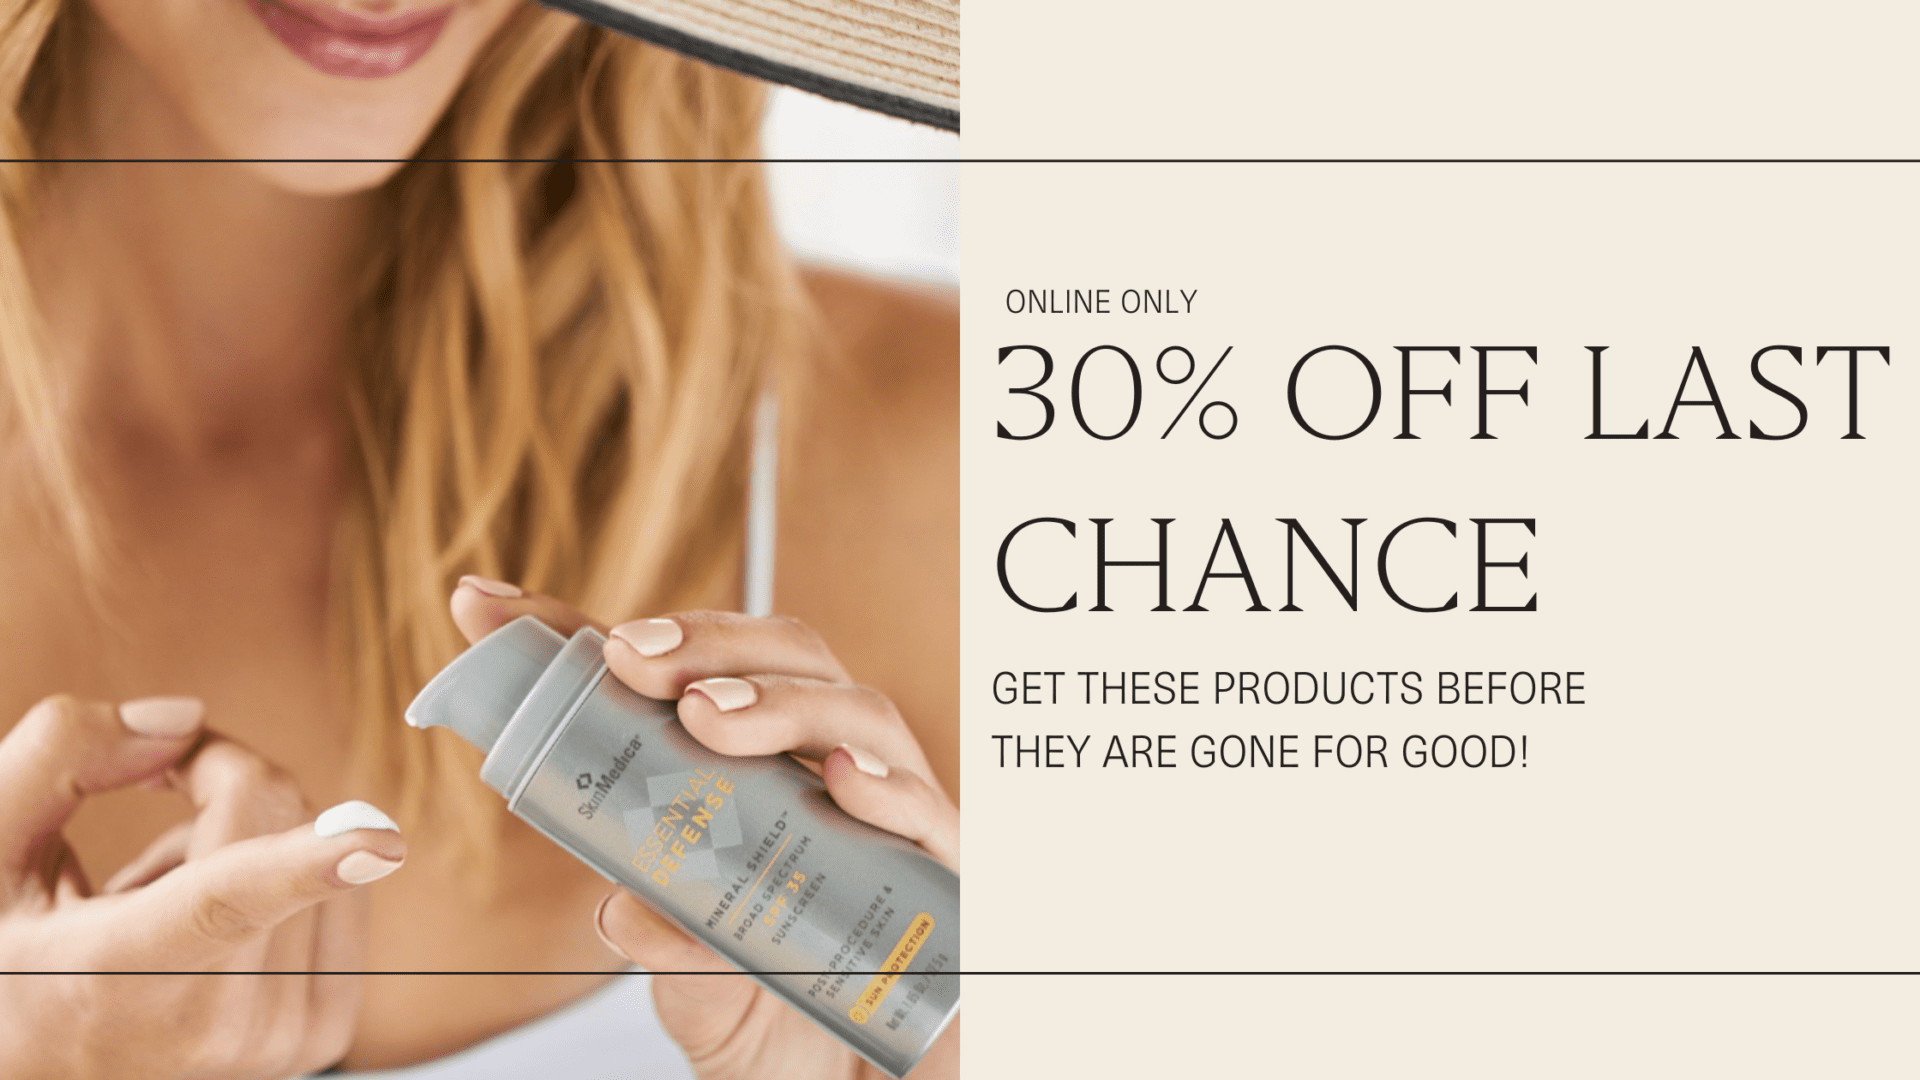 Shop our last chance products 